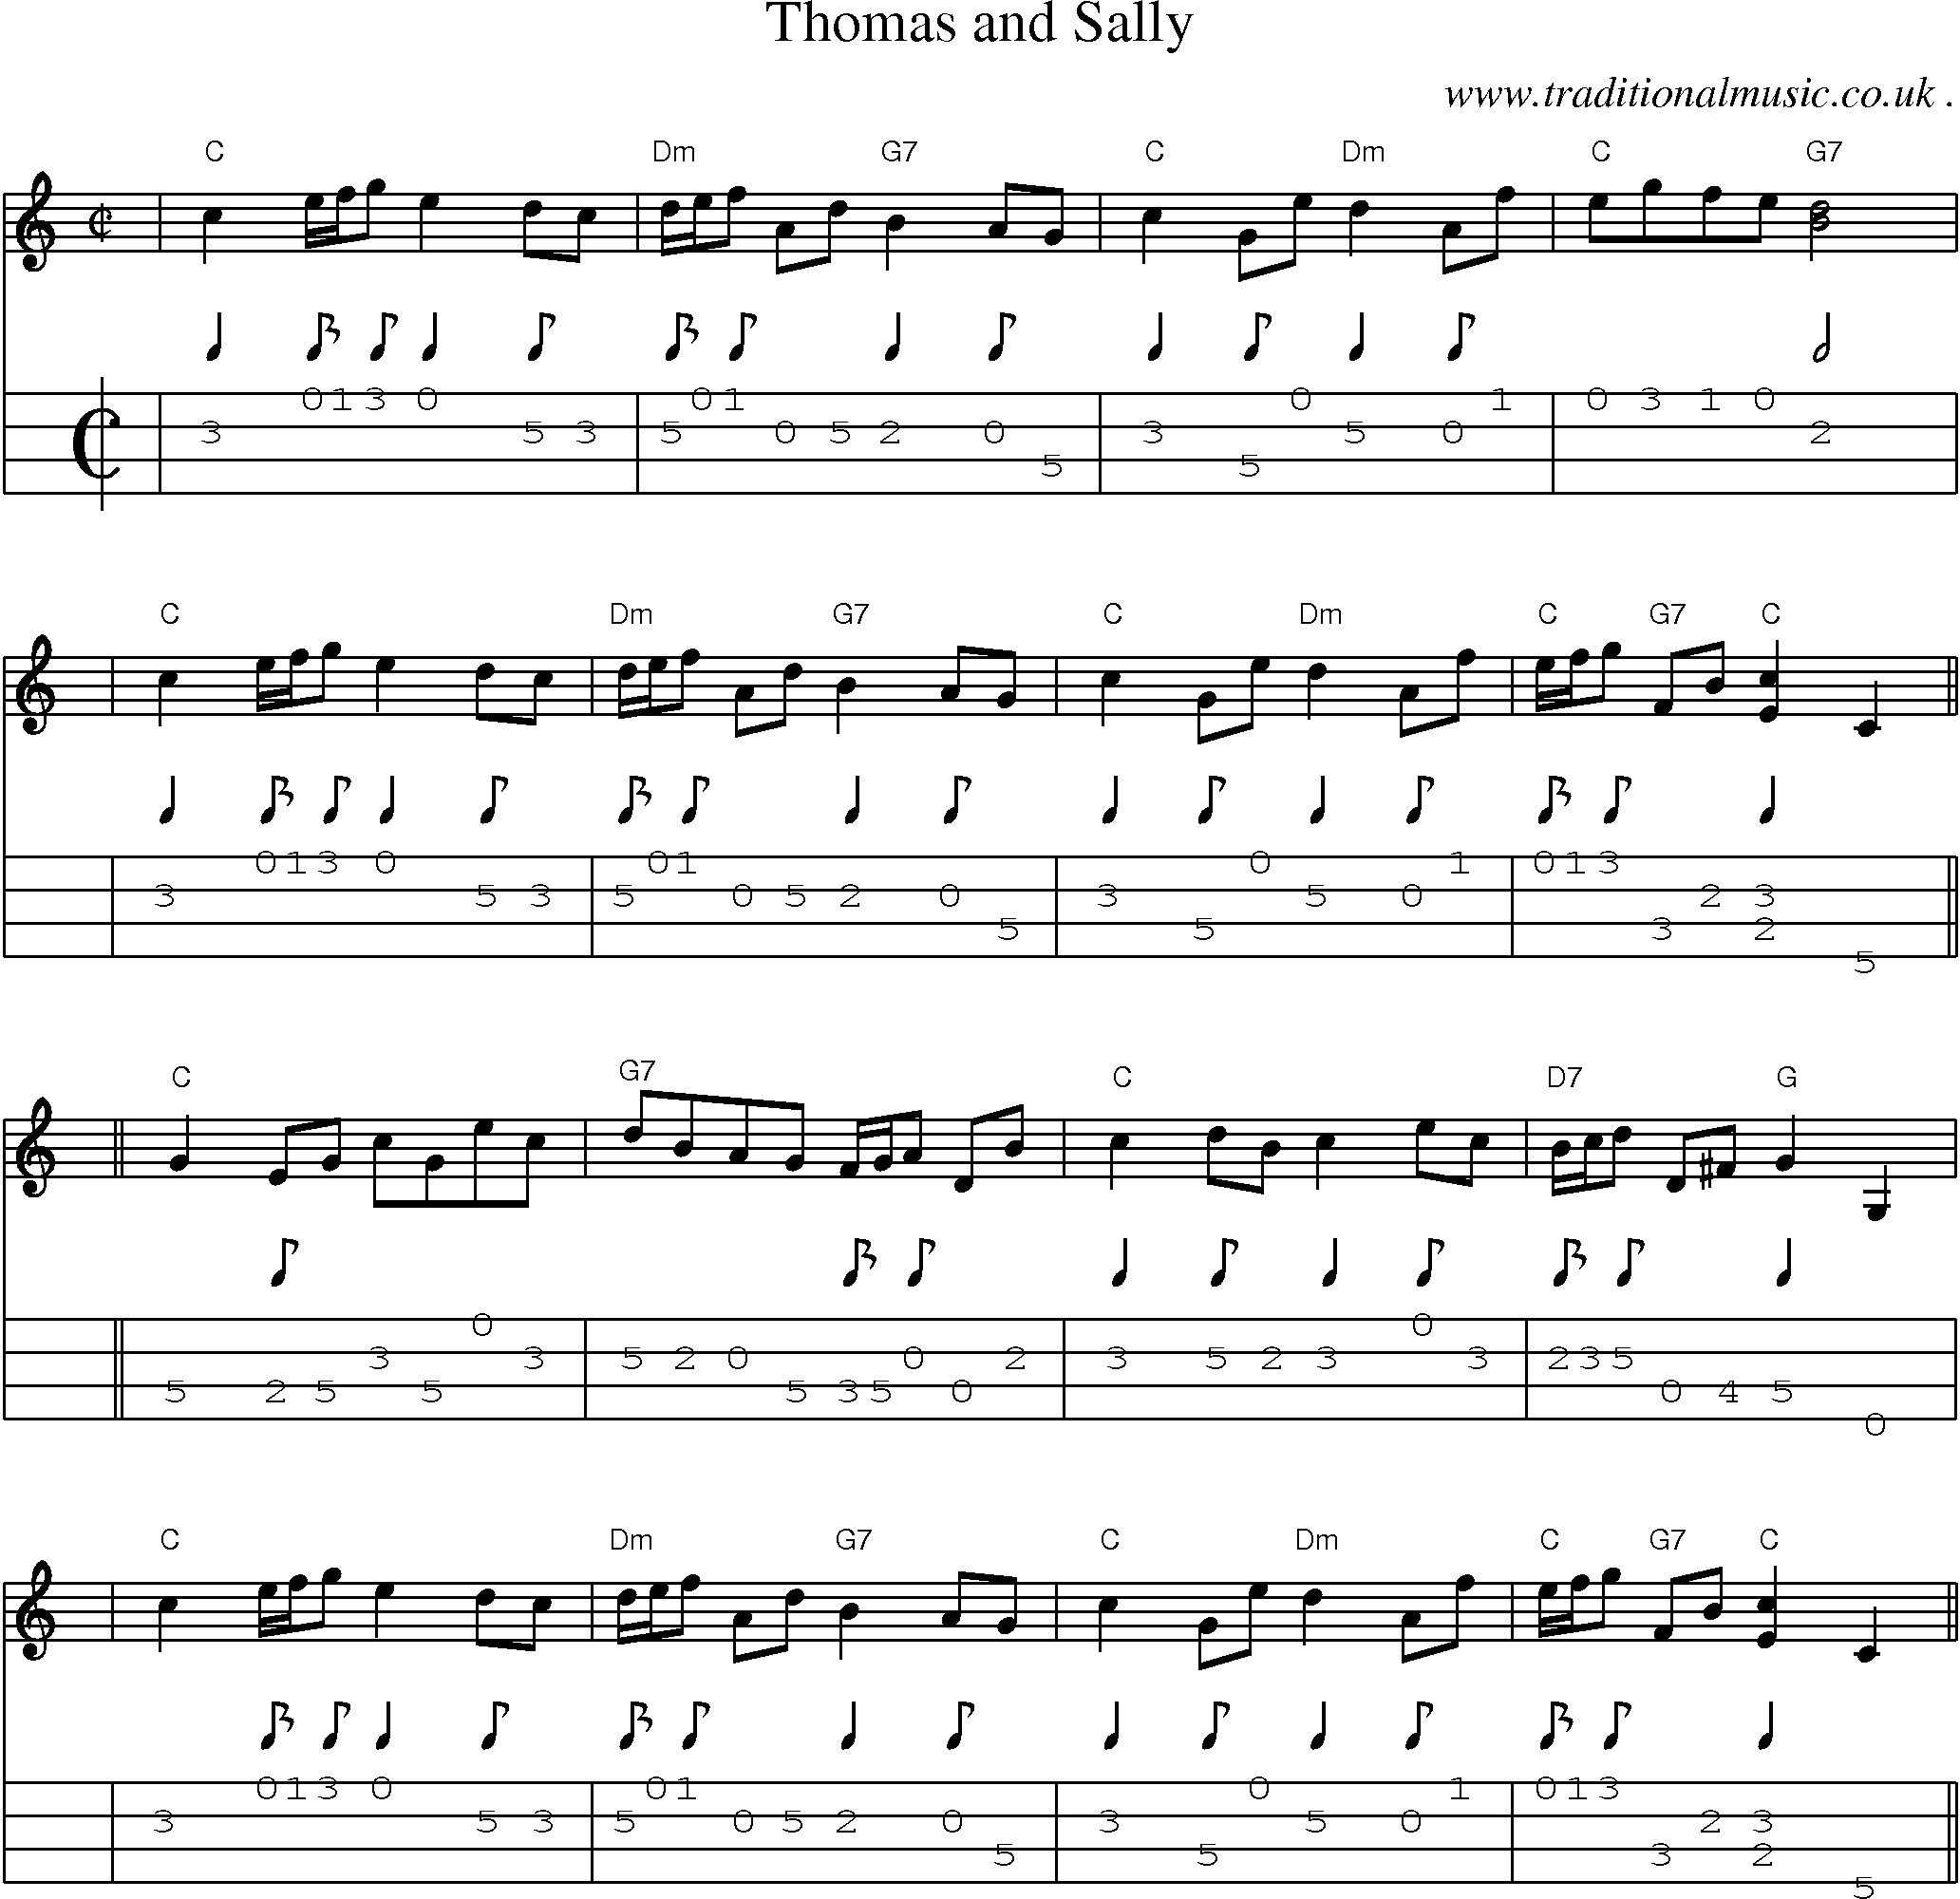 Sheet-music  score, Chords and Mandolin Tabs for Thomas And Sally